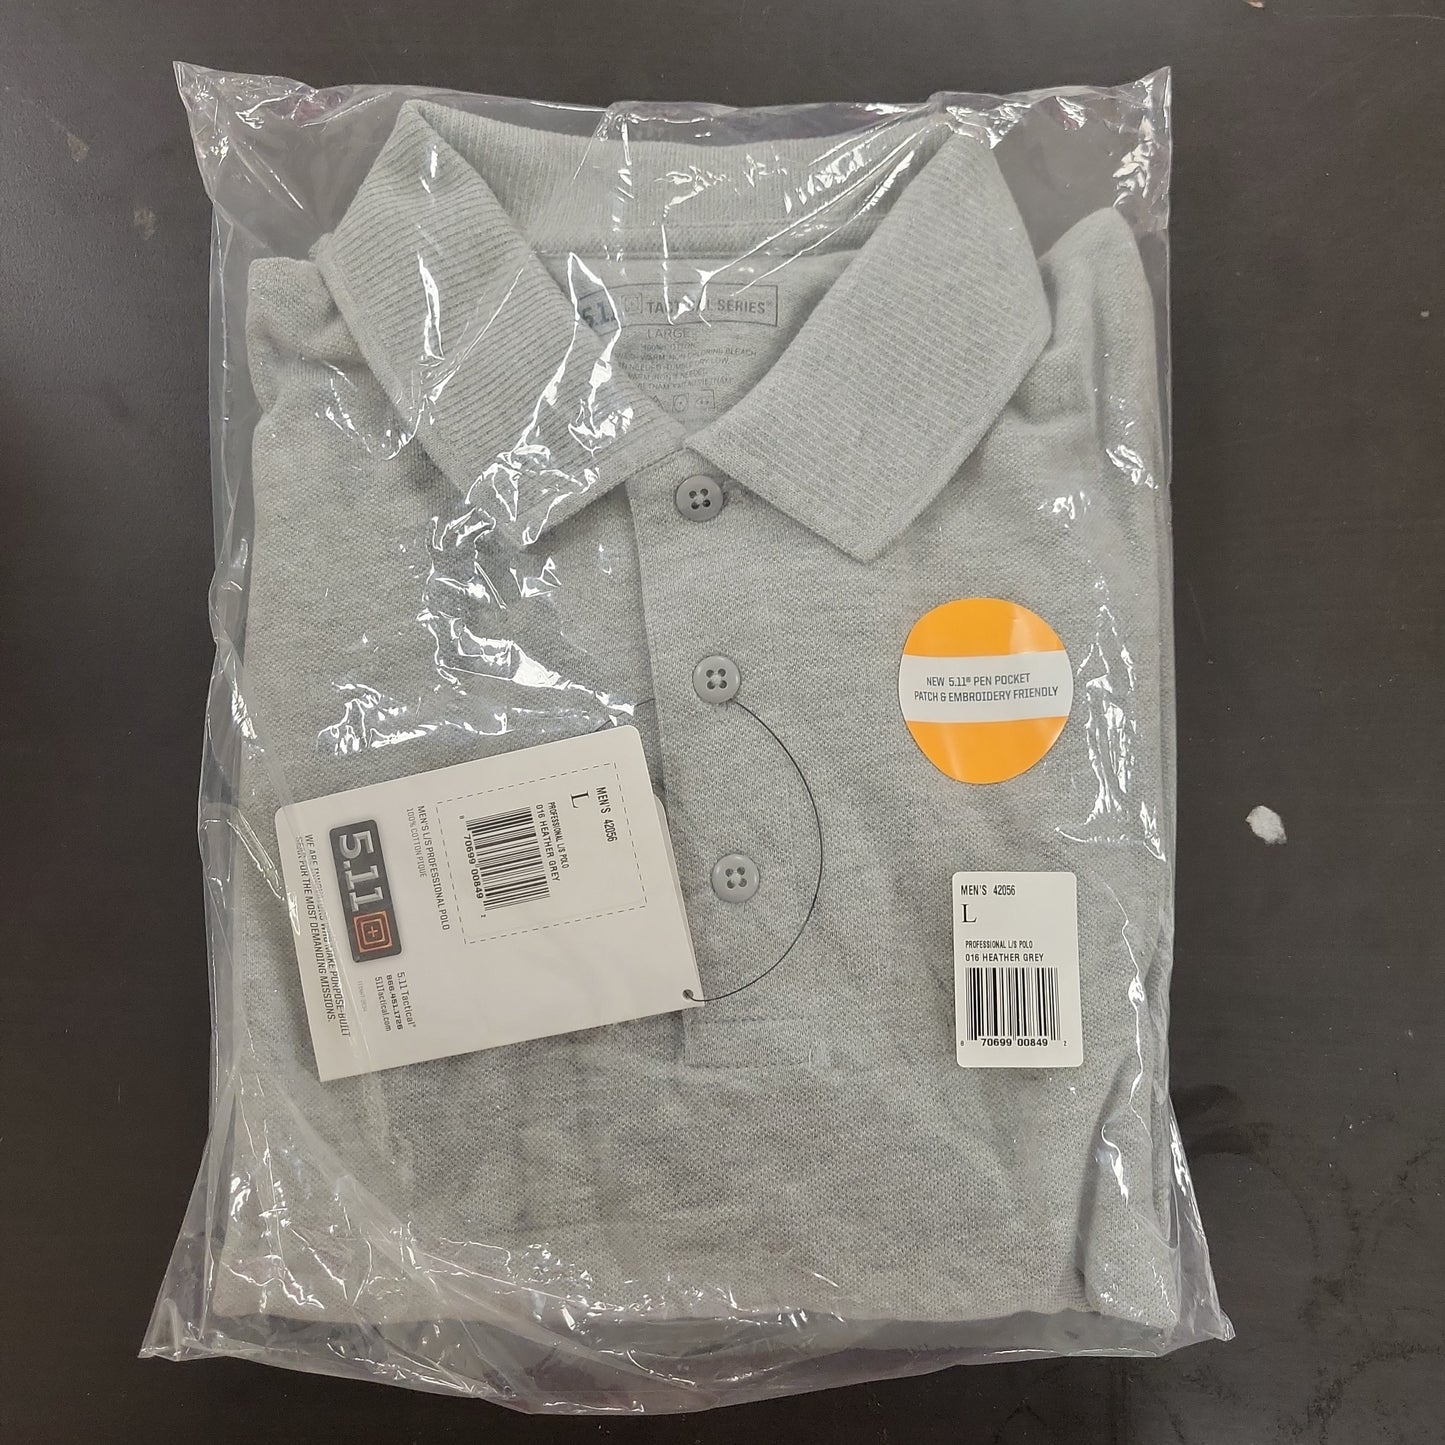 5.11 Tactical Polo Shirt Long Sleeve Professional Heather Grey Large 42056-016-L